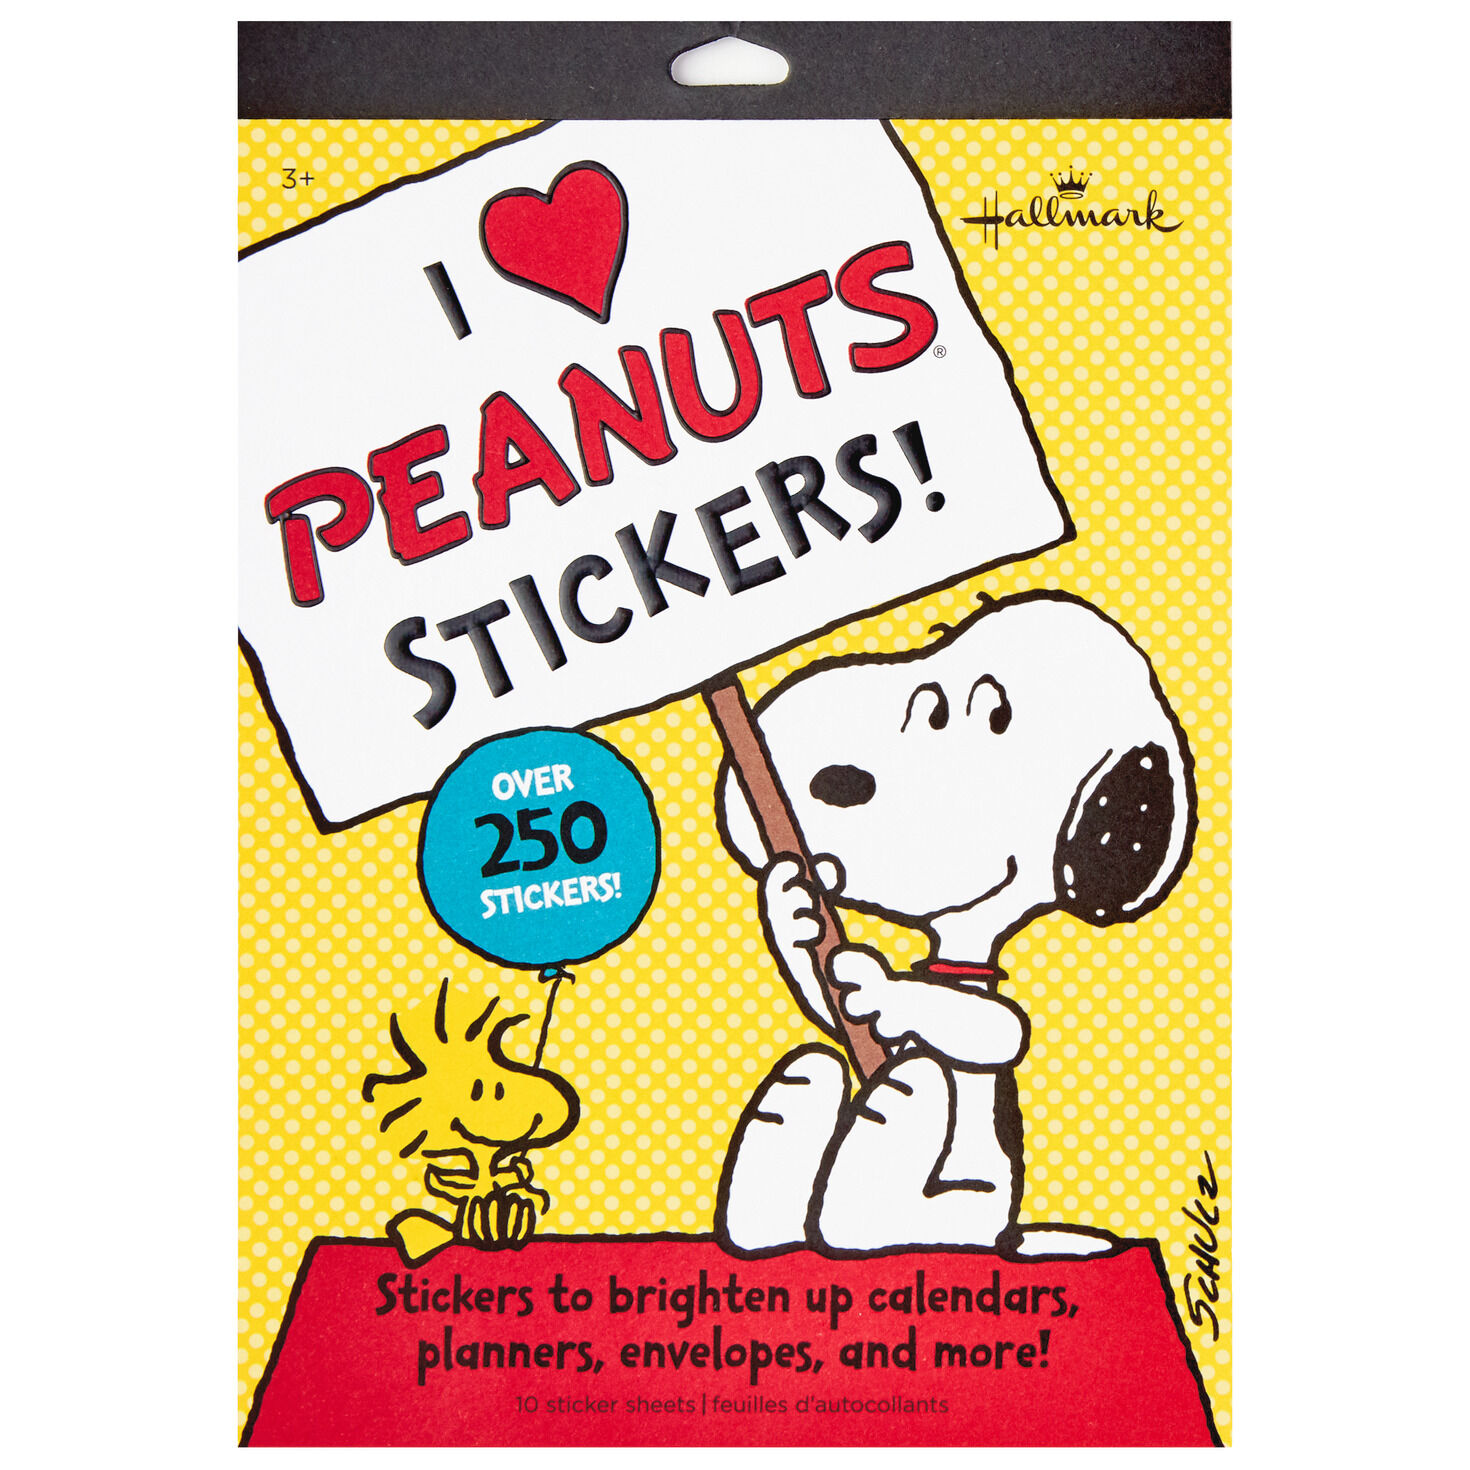 https://www.hallmark.com/dw/image/v2/AALB_PRD/on/demandware.static/-/Sites-hallmark-master/default/dwa329a3a4/images/finished-goods/Peanuts-Snoopy-and-Friends-Sticker-Book_1SOM3854_01.jpg?sfrm=jpg